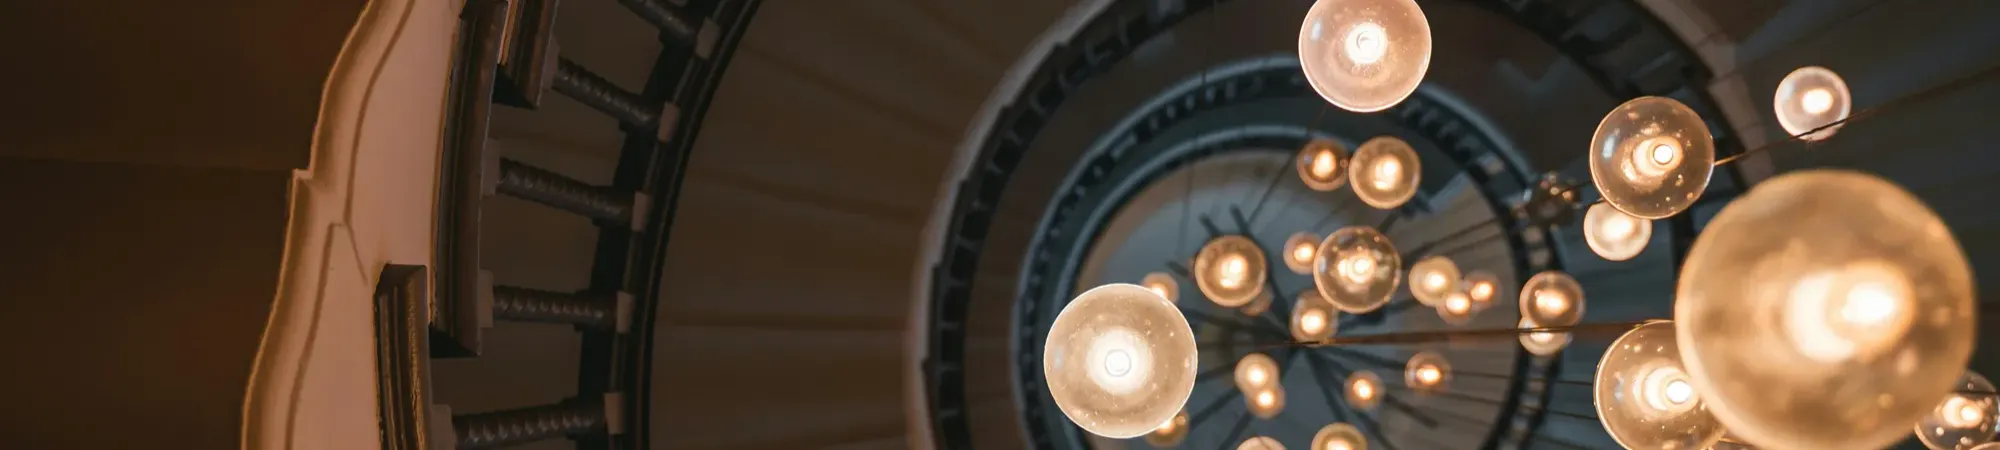 Spiral stair case with round light bulbs